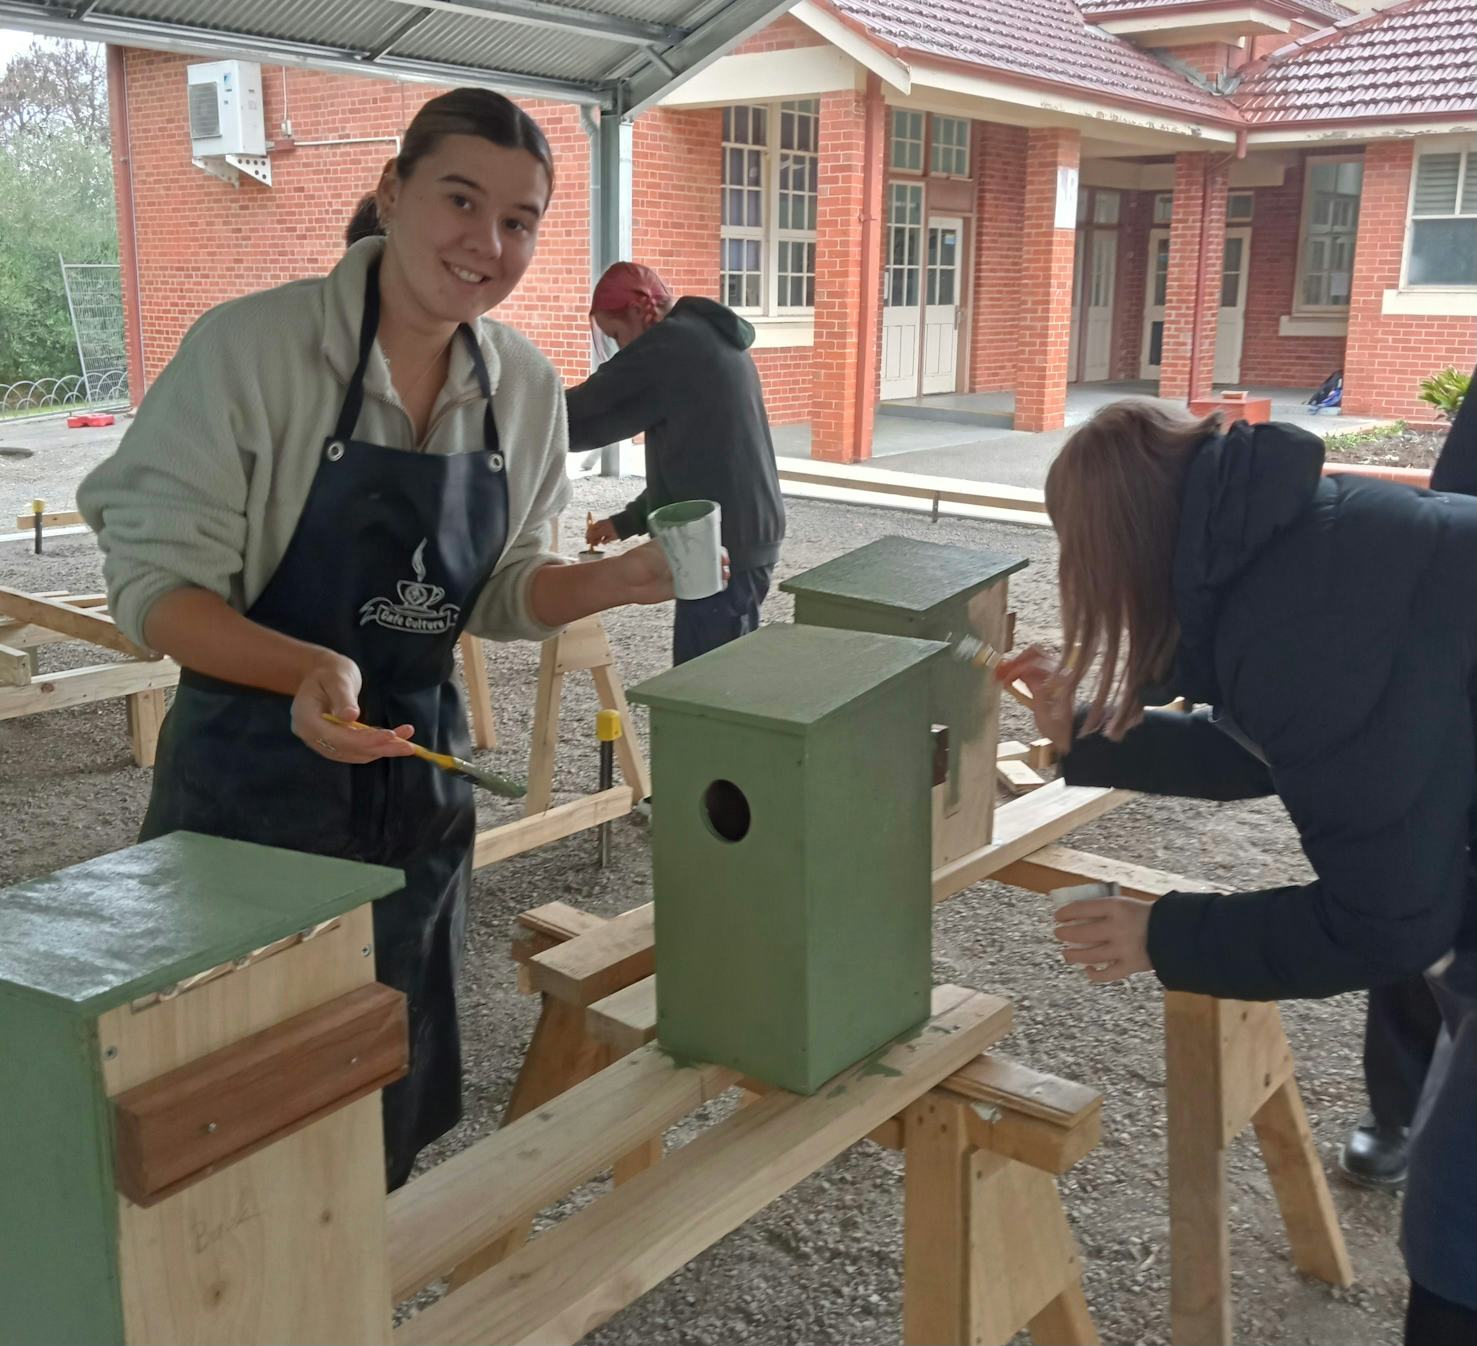 Students paint the nesting boxes to blend into the natural environment, ready for installation (Image source : Ken Beasley)